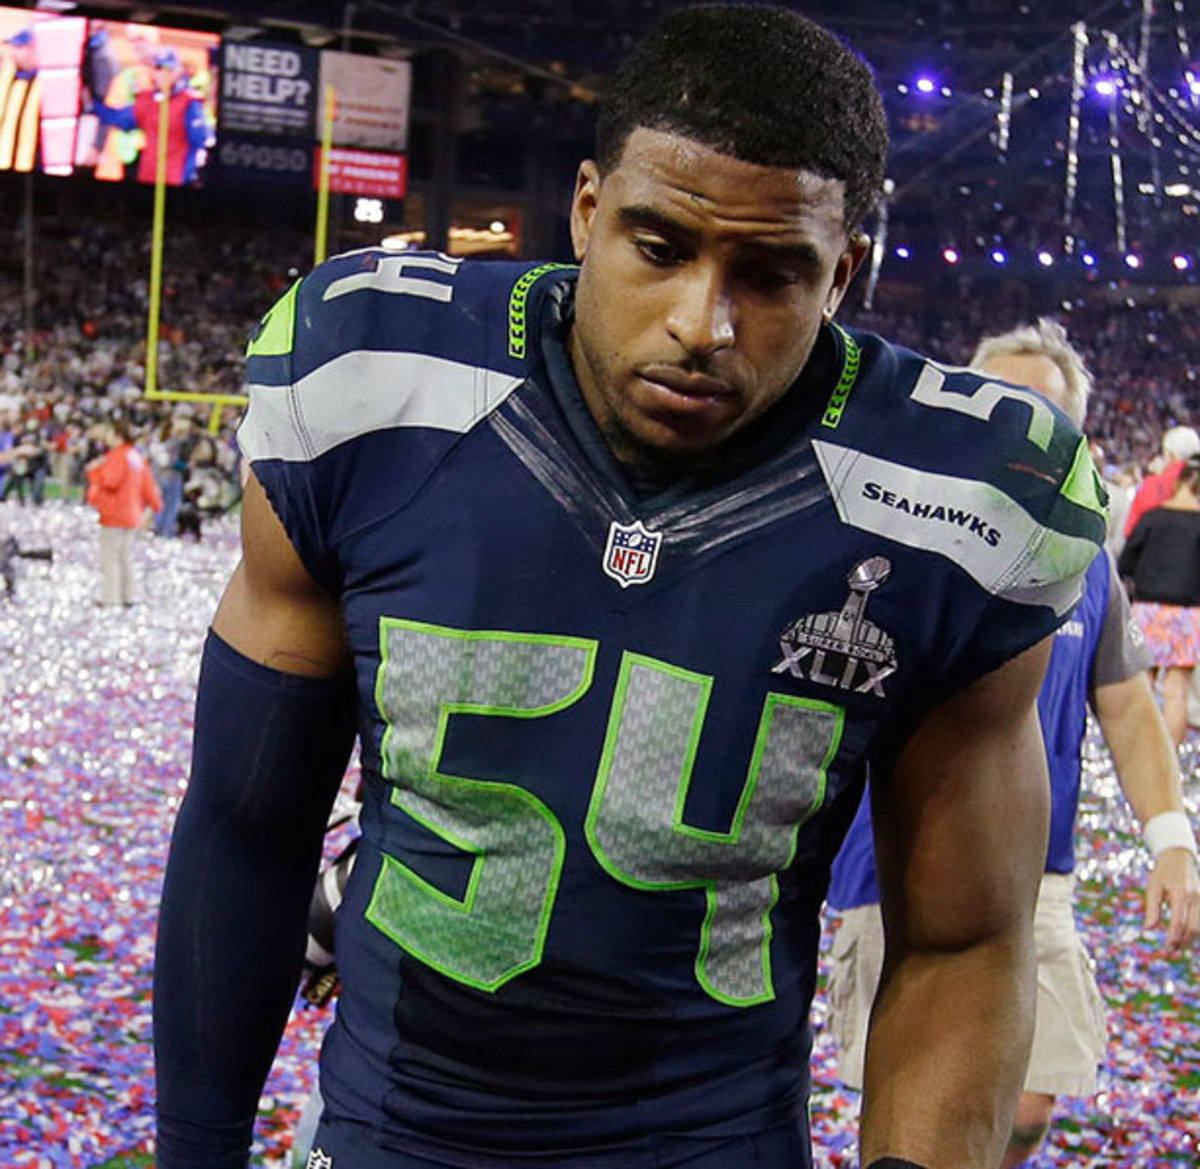 Oberto signs Seahawks' Bobby Wagner as part of multimillion-dollar